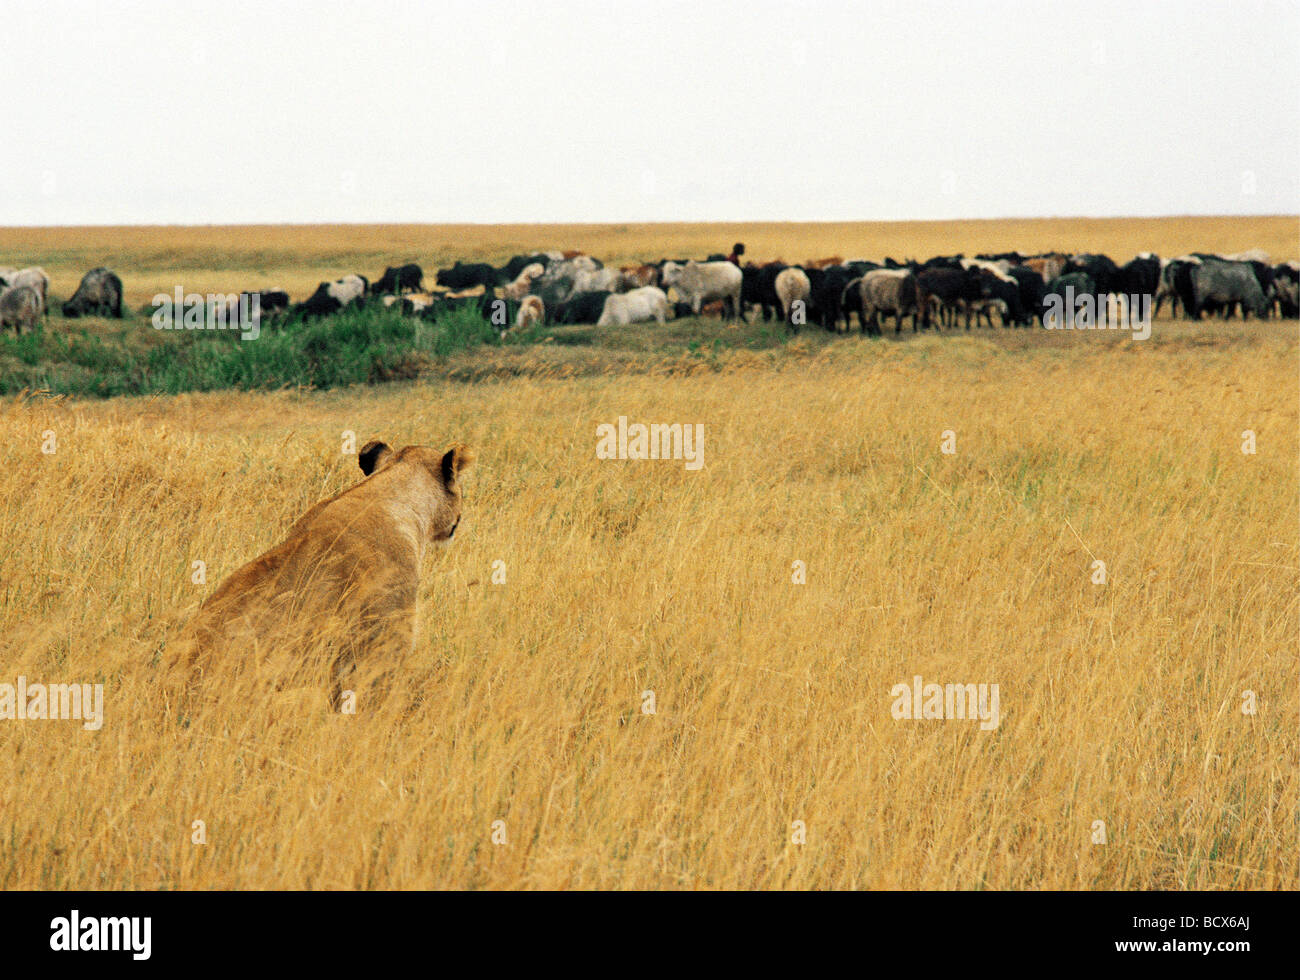 Lioness in long grass slinks away from herd of Maasai cattle after spotting Maasai man Ngorongoro Crater Tanzania East Africa Stock Photo